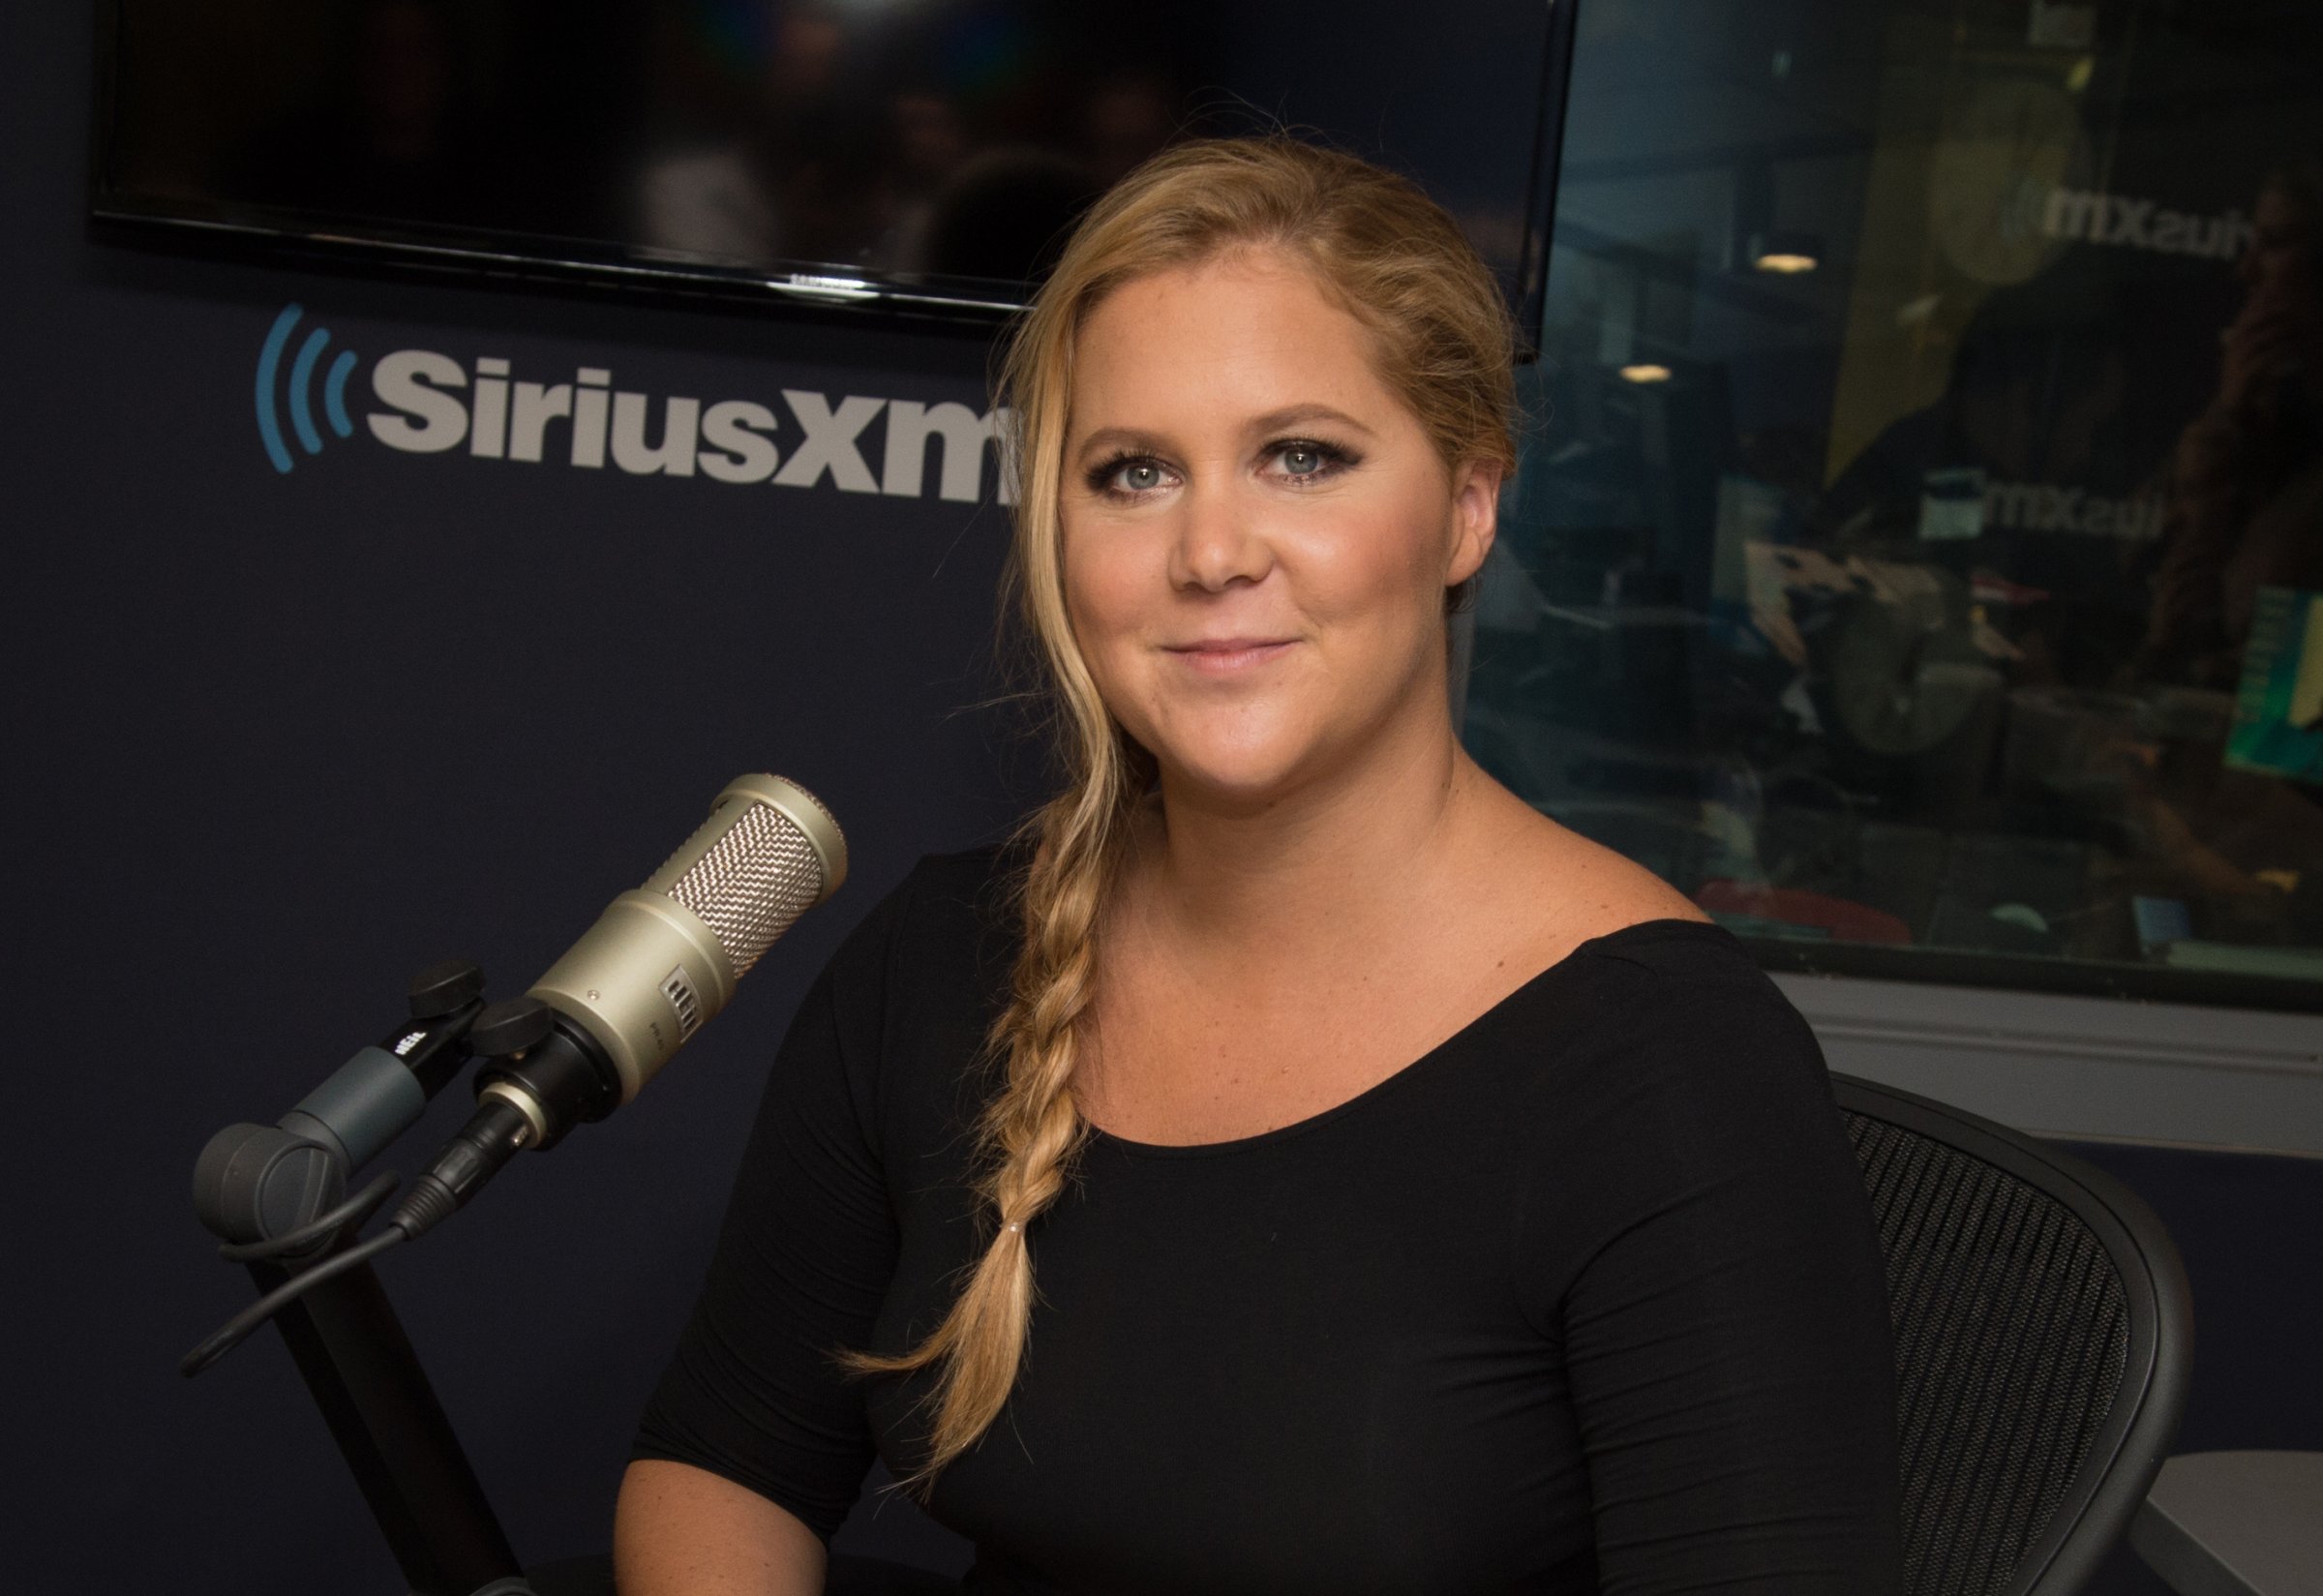 Comedian Amy Schumer visits SiriusXM at SiriusXM Studio on August 23, 2016 in New York City.